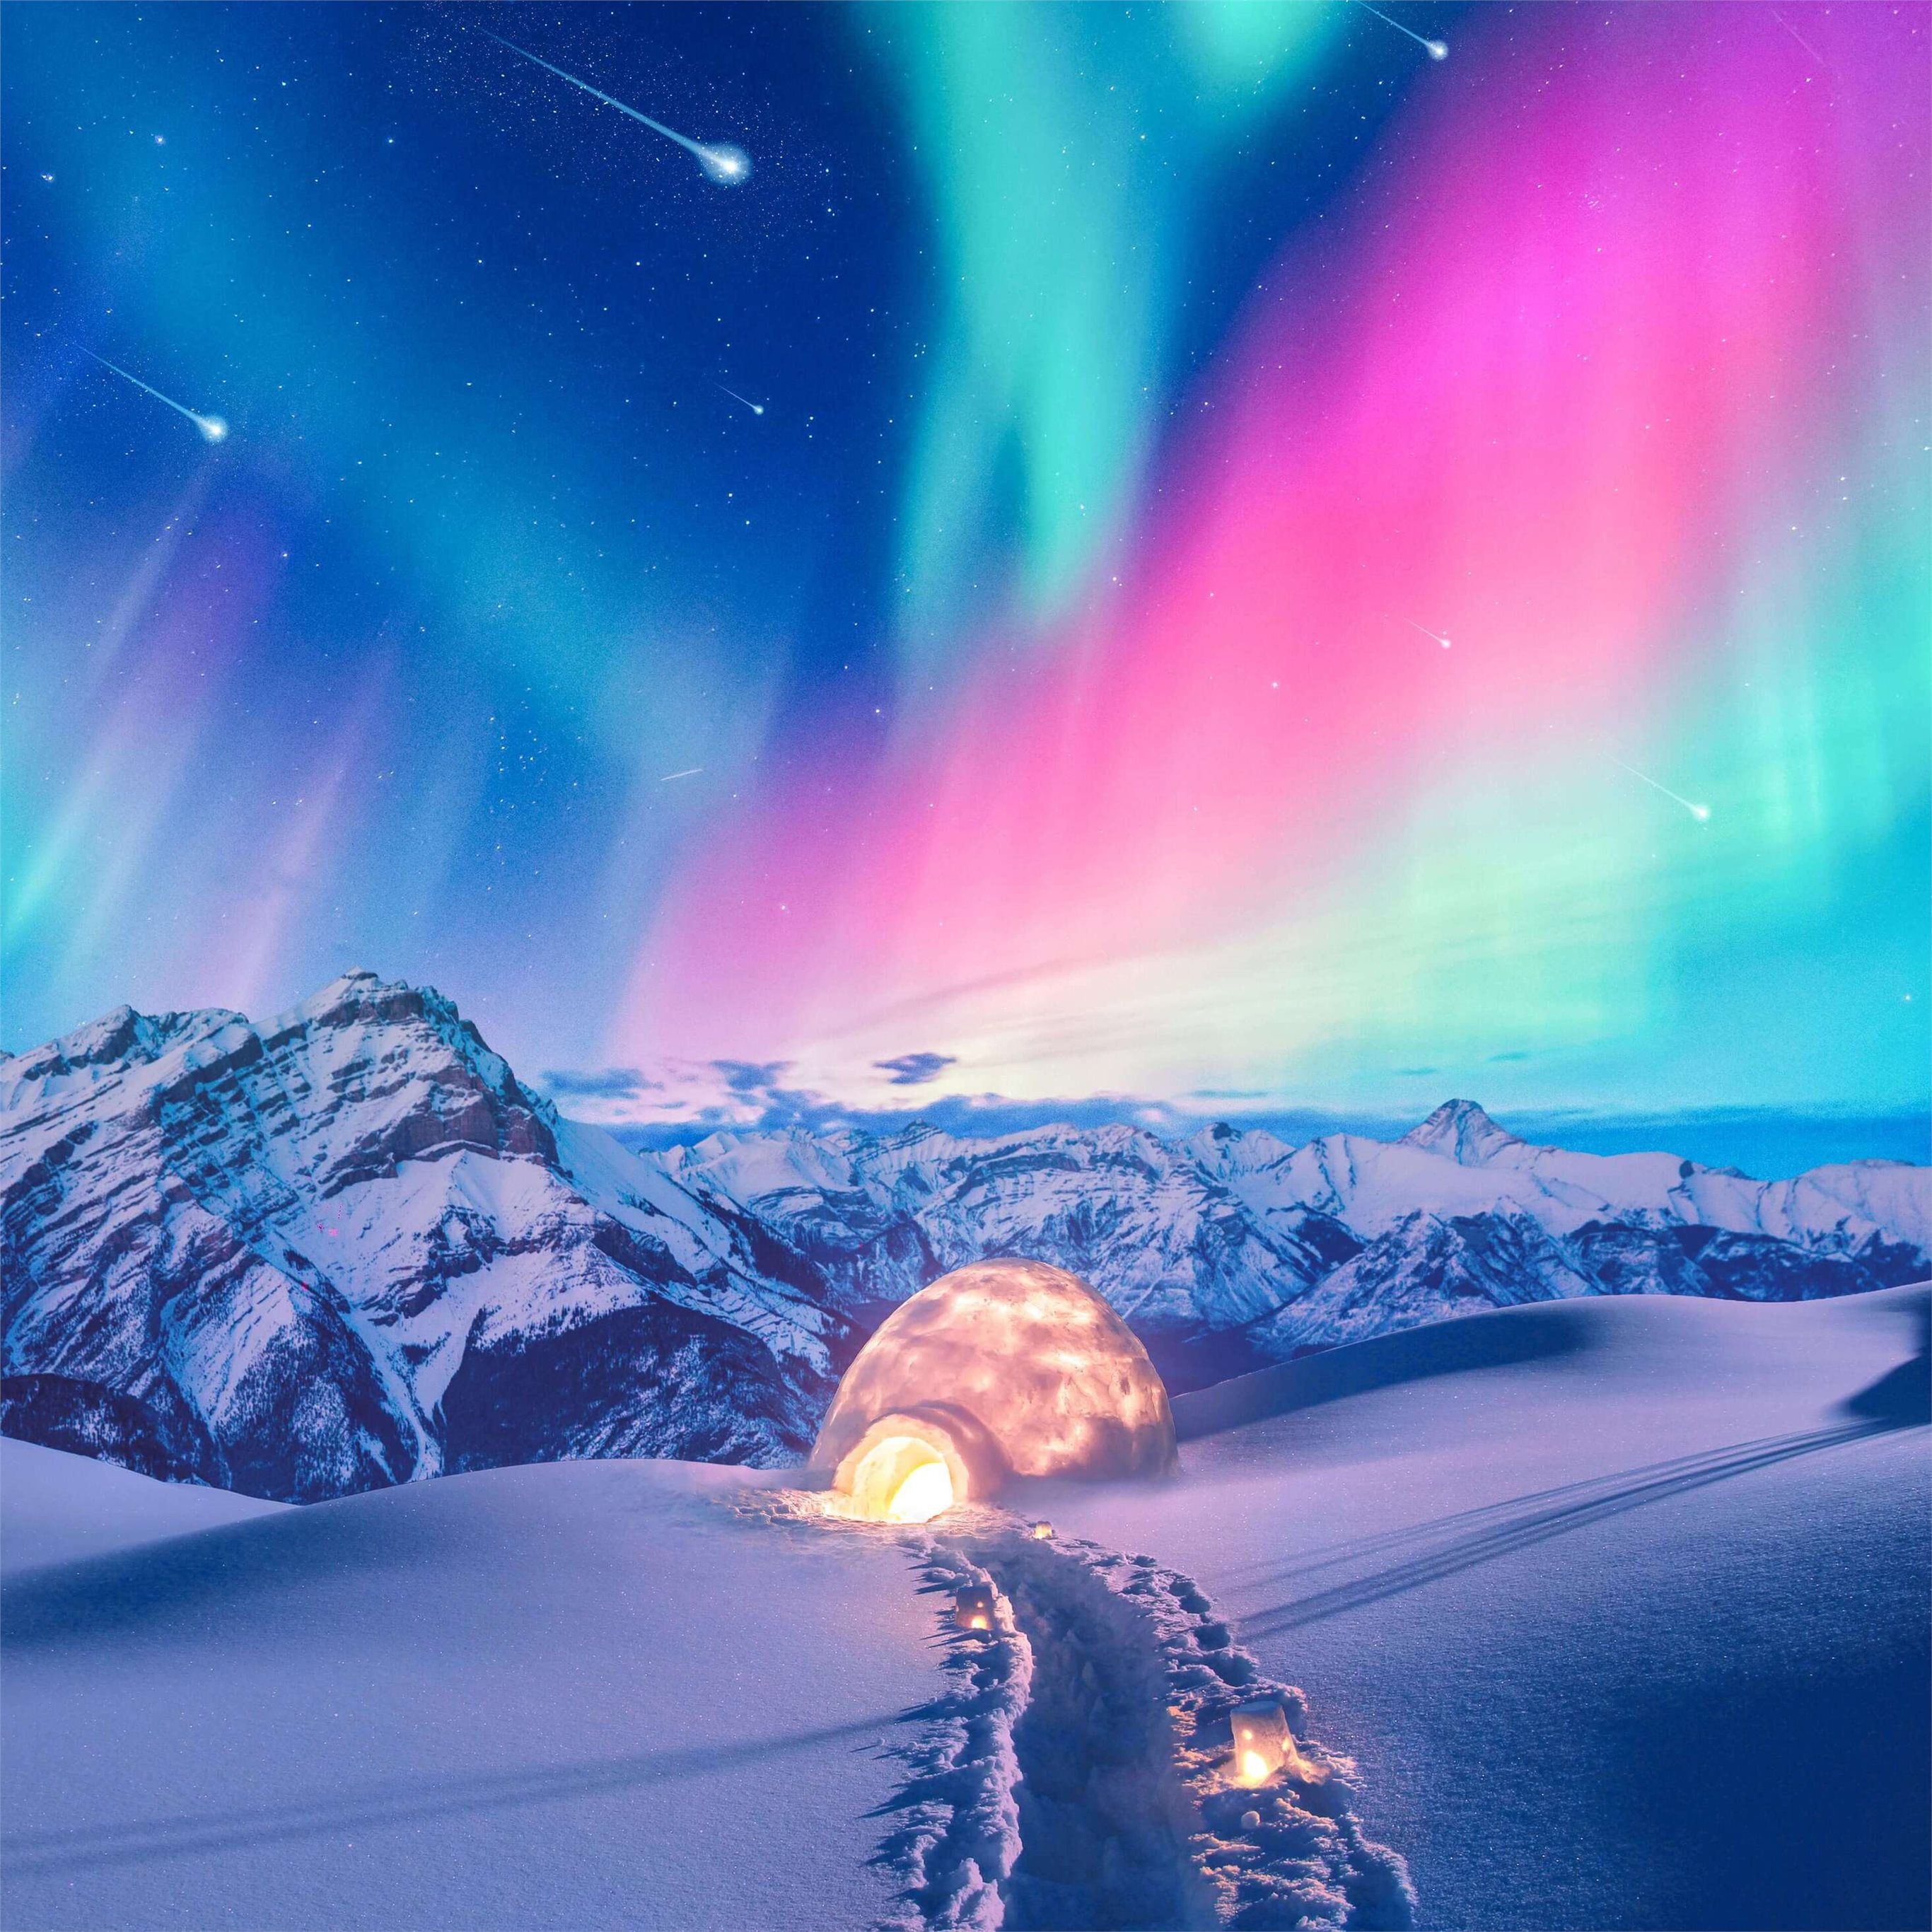 15 Perfect northern lights 4k desktop wallpaper You Can Save It Free Of ...